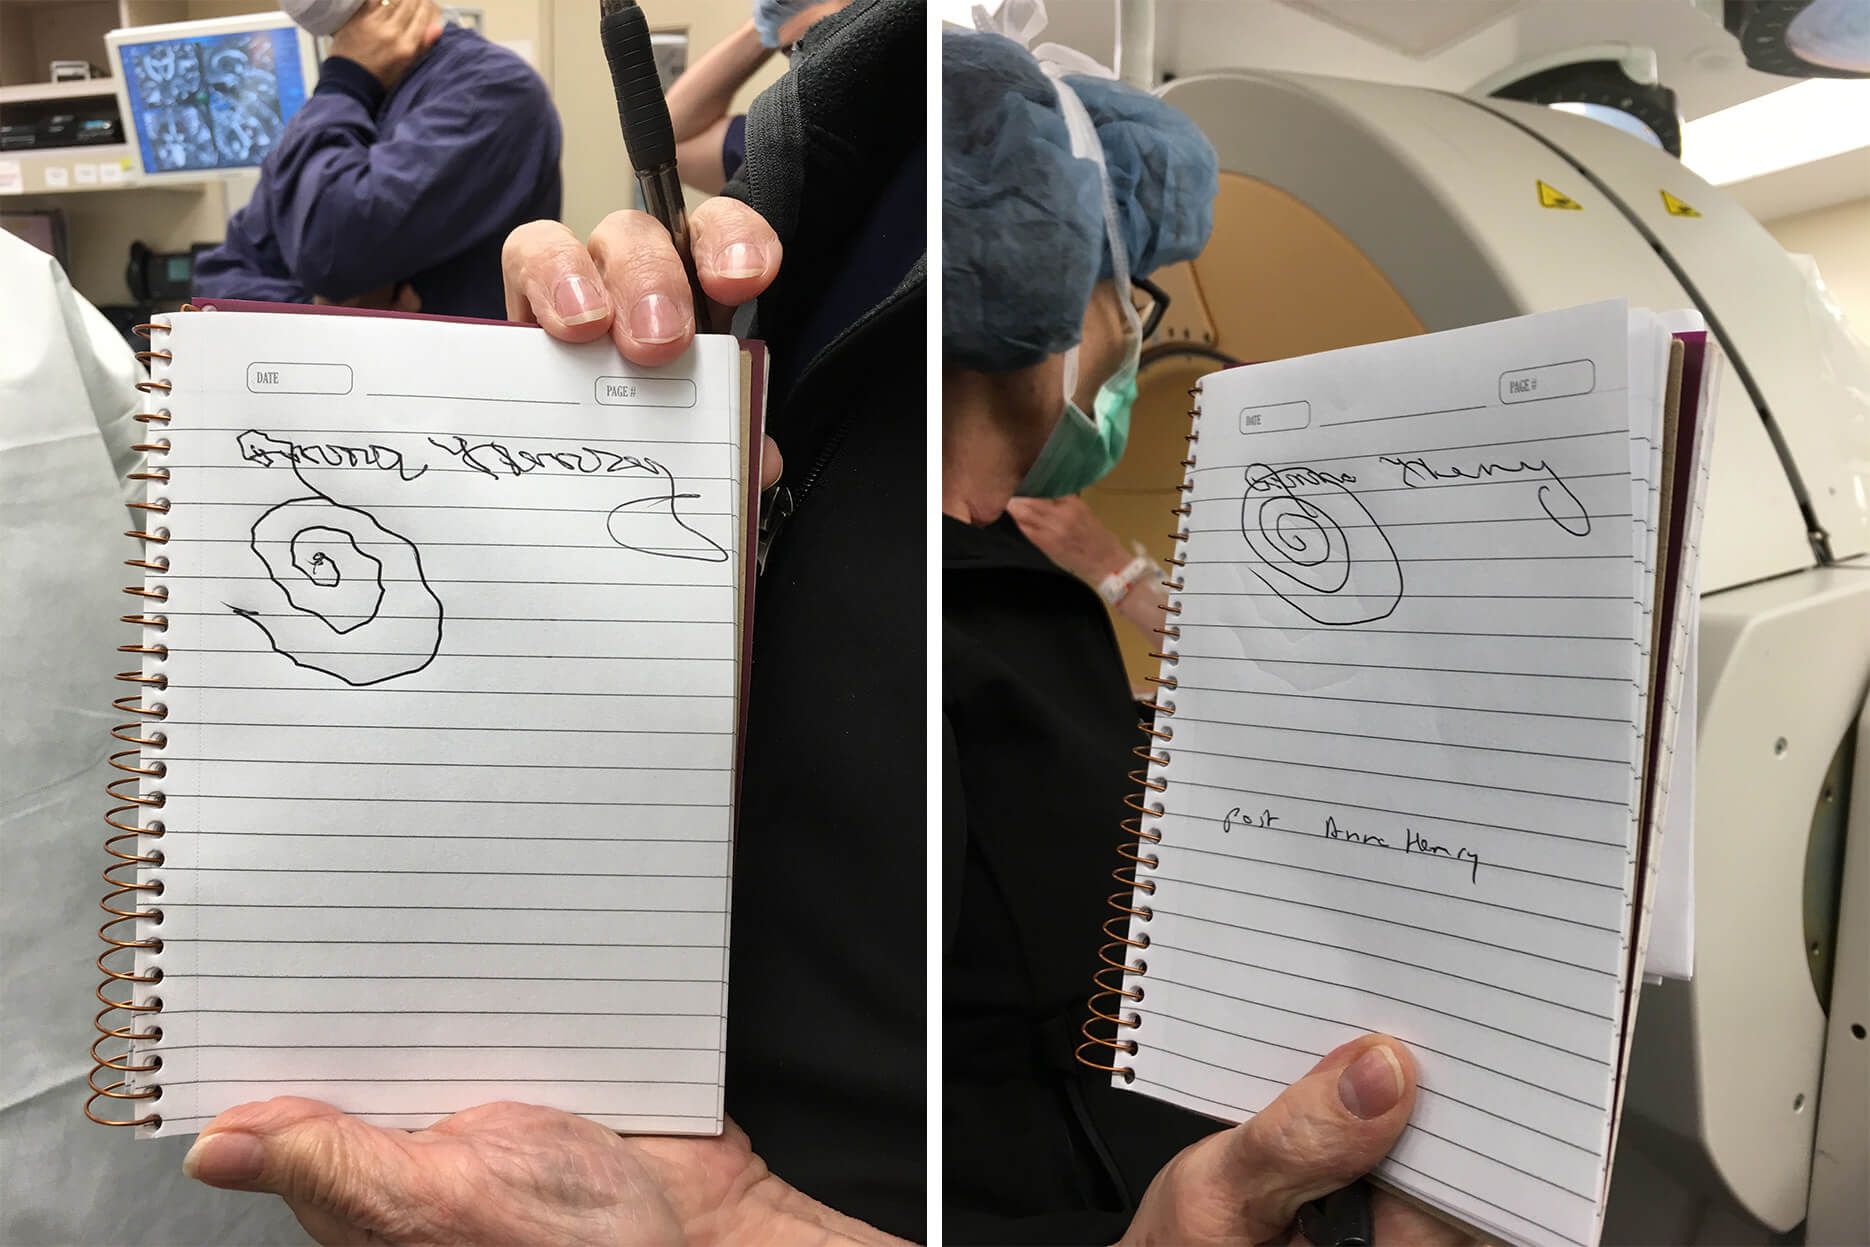 Before and after: Henry's handwriting test before the deep brain stimulation (left). Henry's handwriting test after the deep brain stimulation (right).